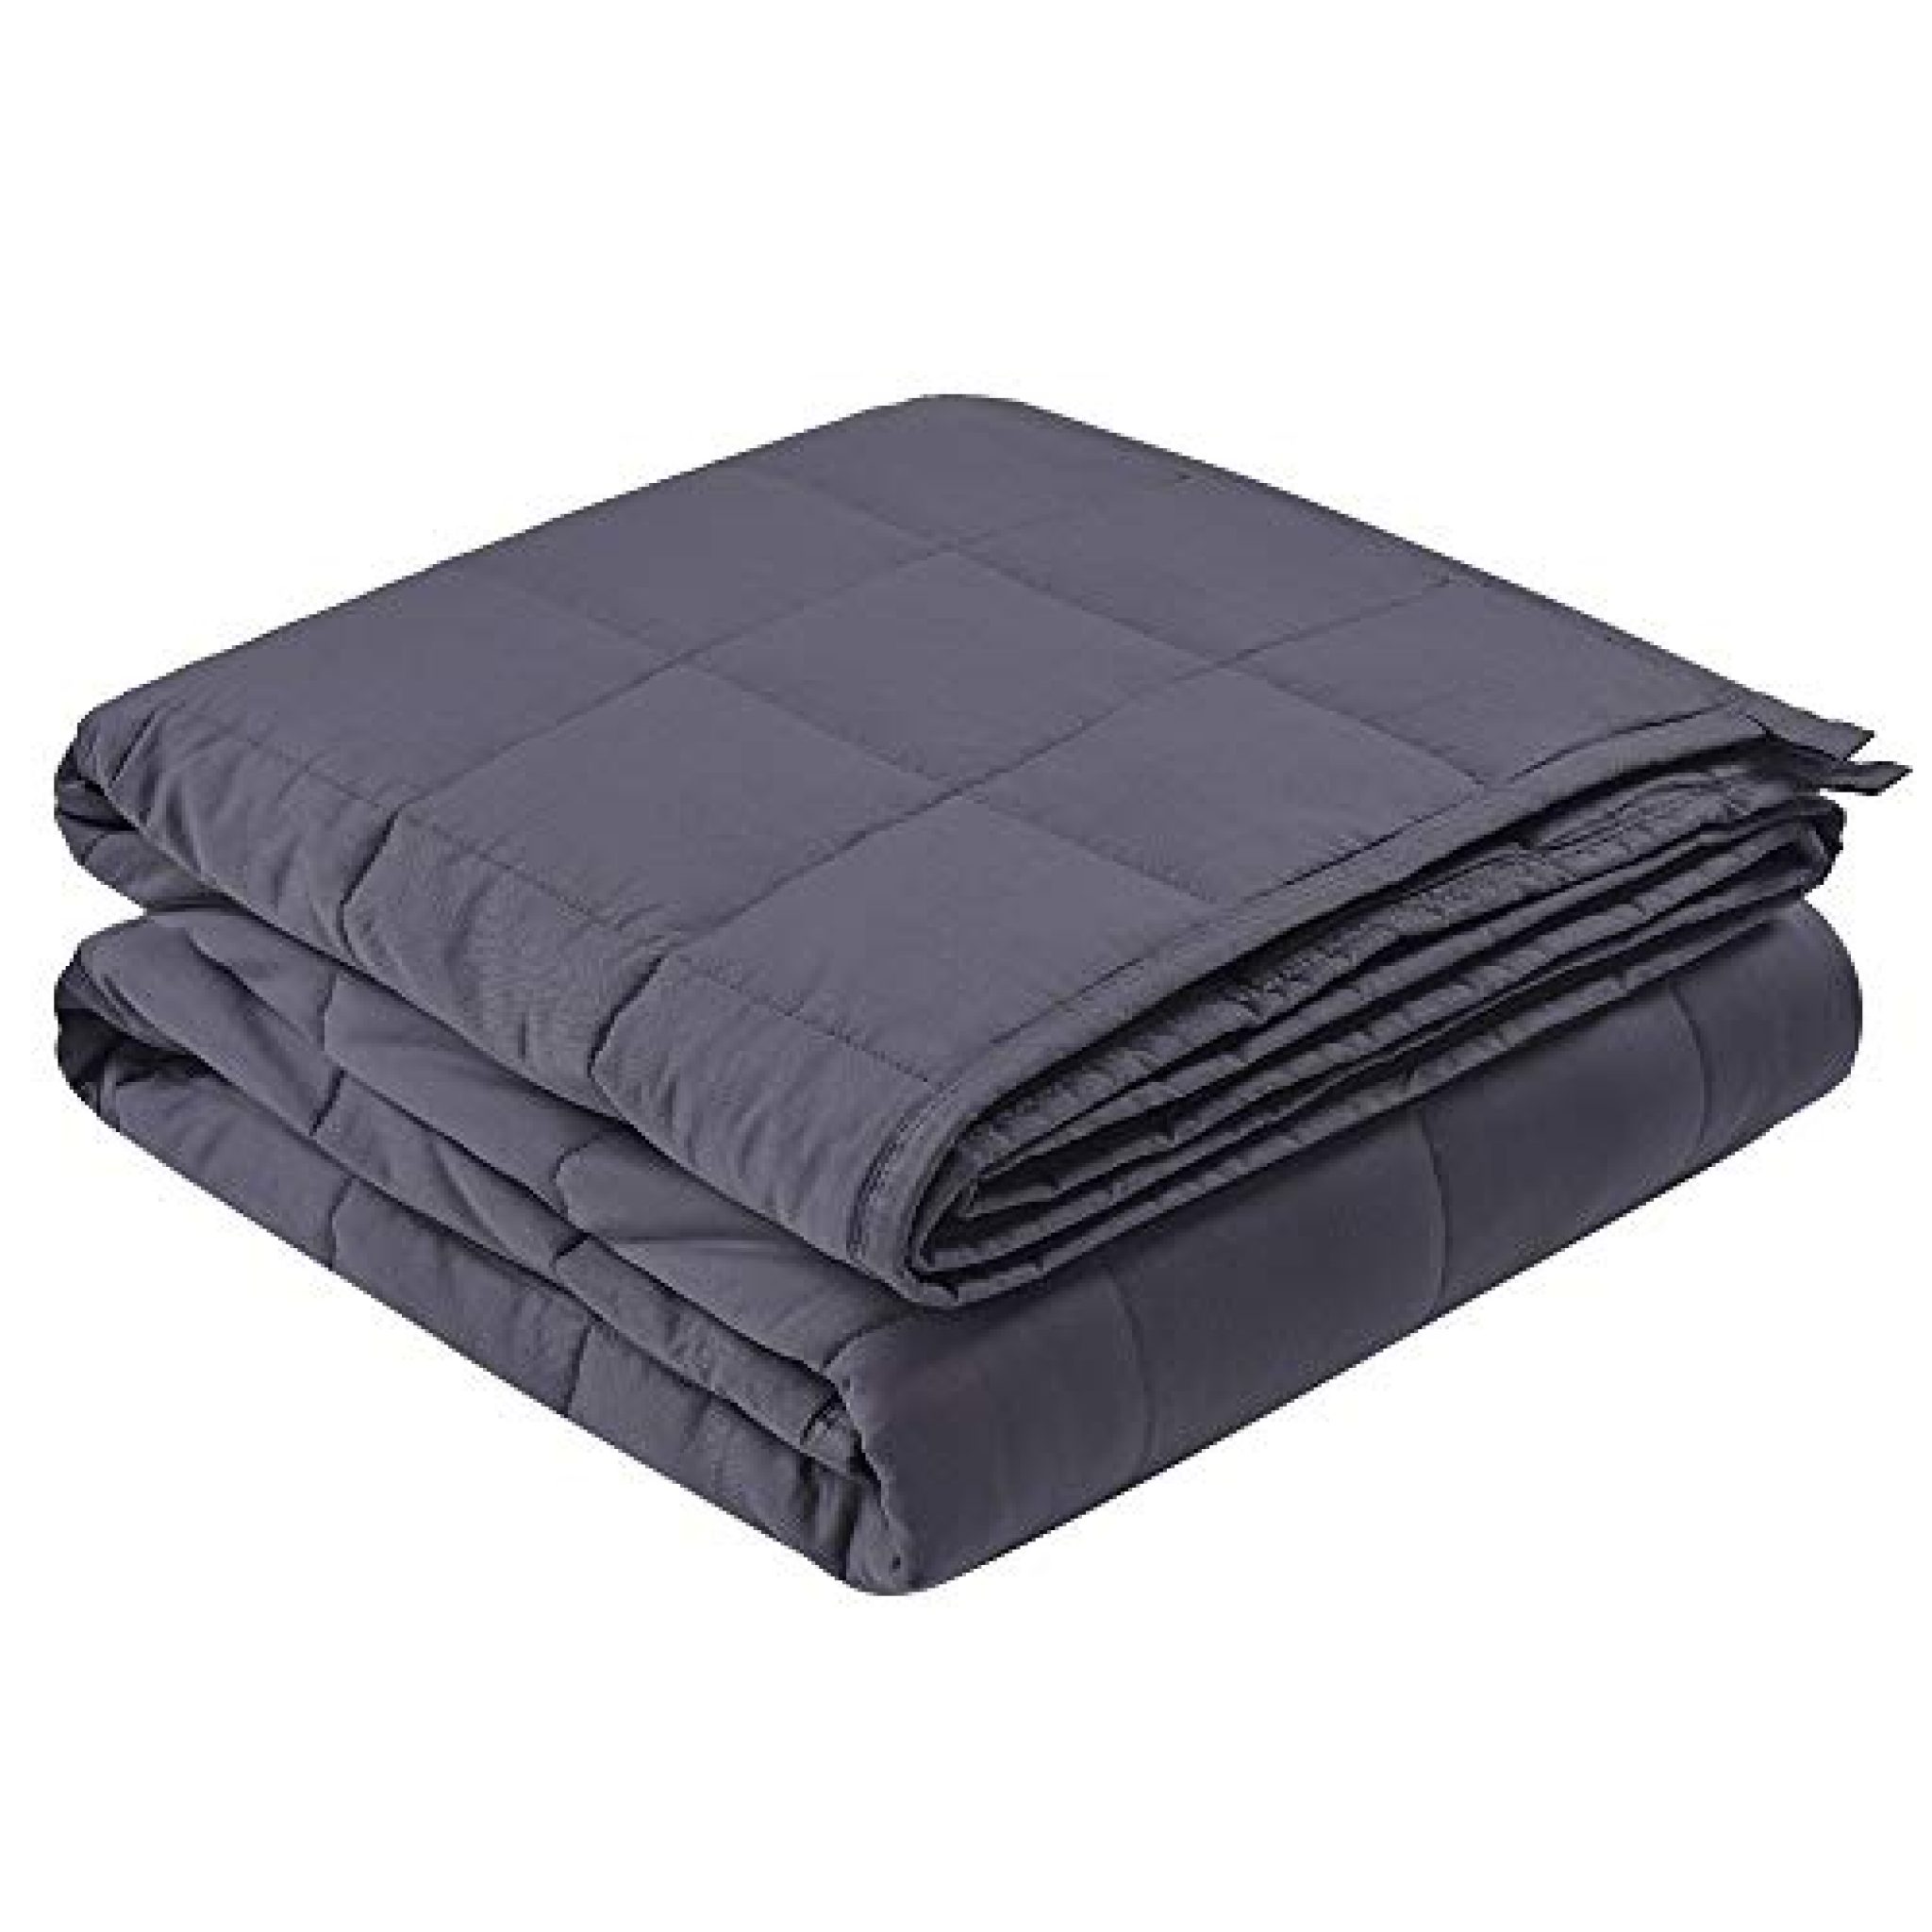 Adult Weighted Blanket (15lbs, 60"x80") — Deals from SaveaLoonie!